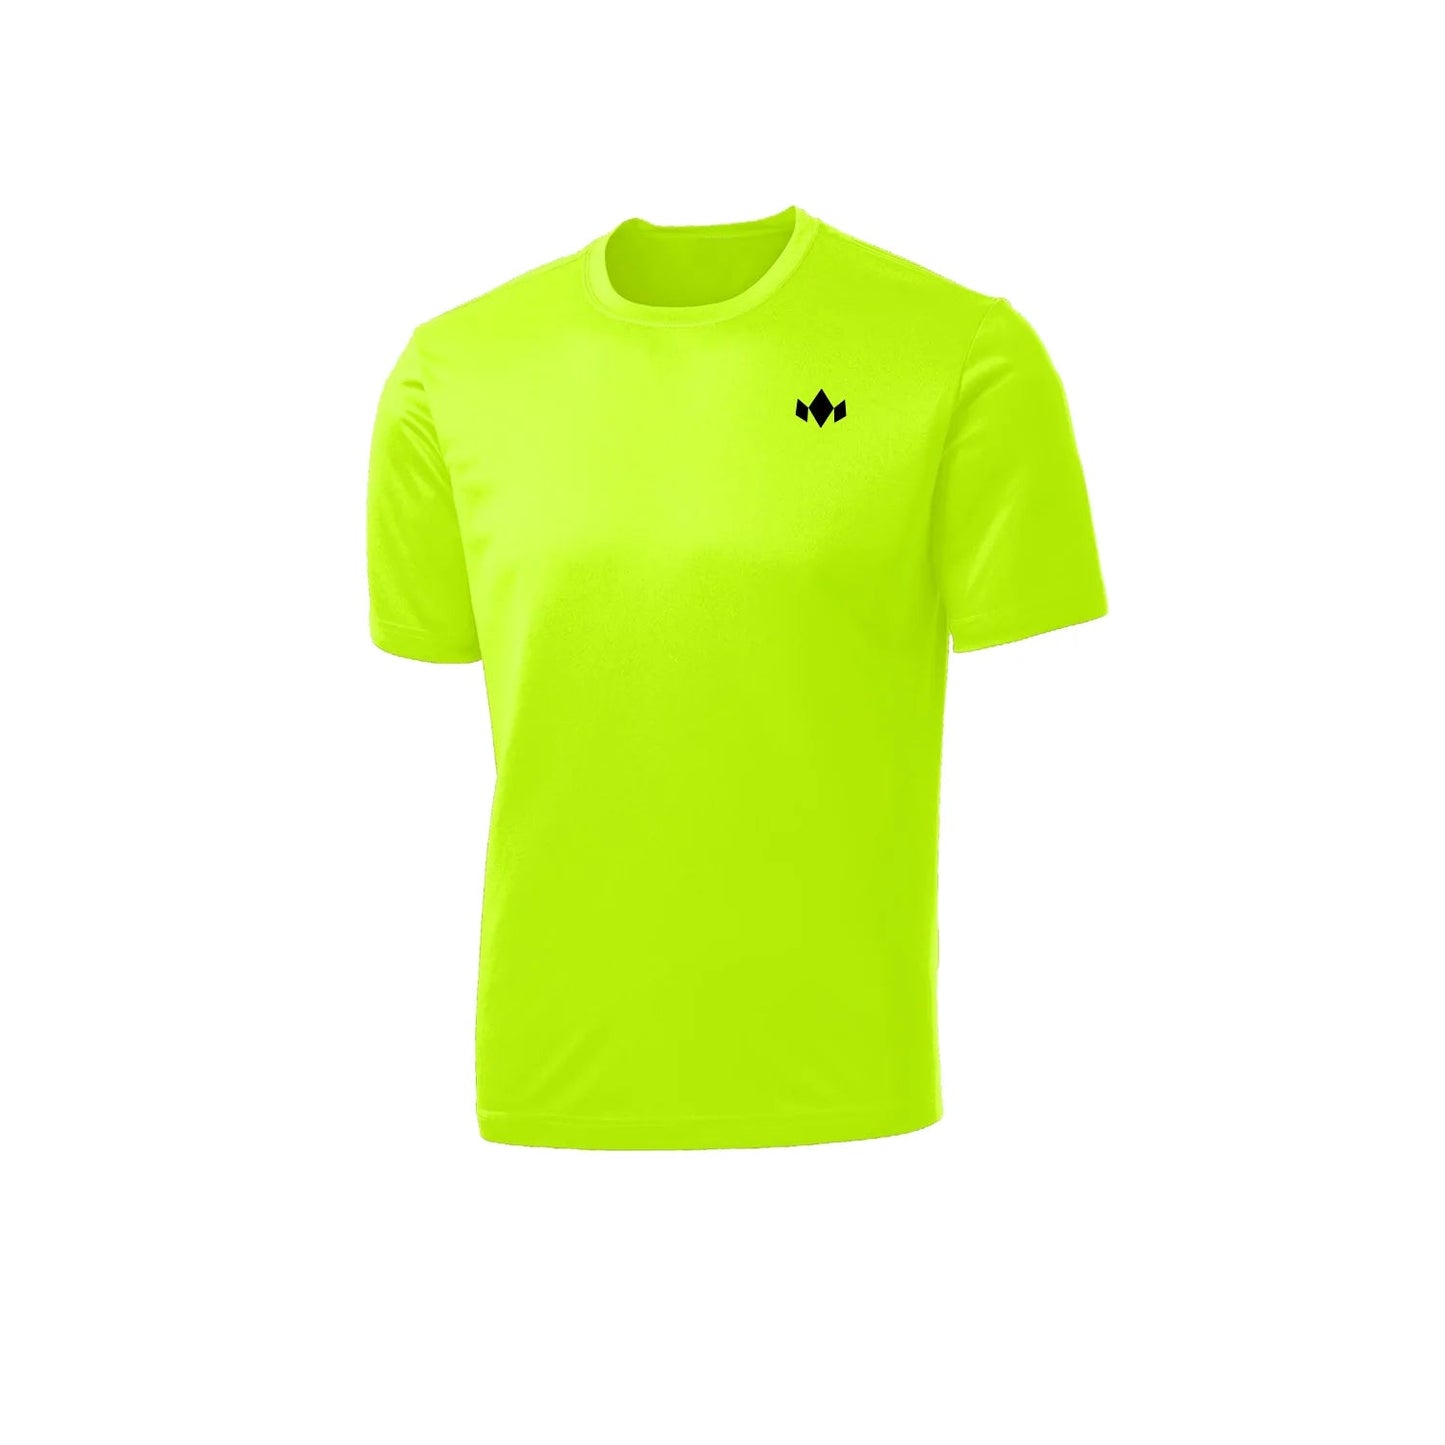 DRY-CORE 100% POLYESTER SHIRT - Grip On Golf & Pickleball Zone